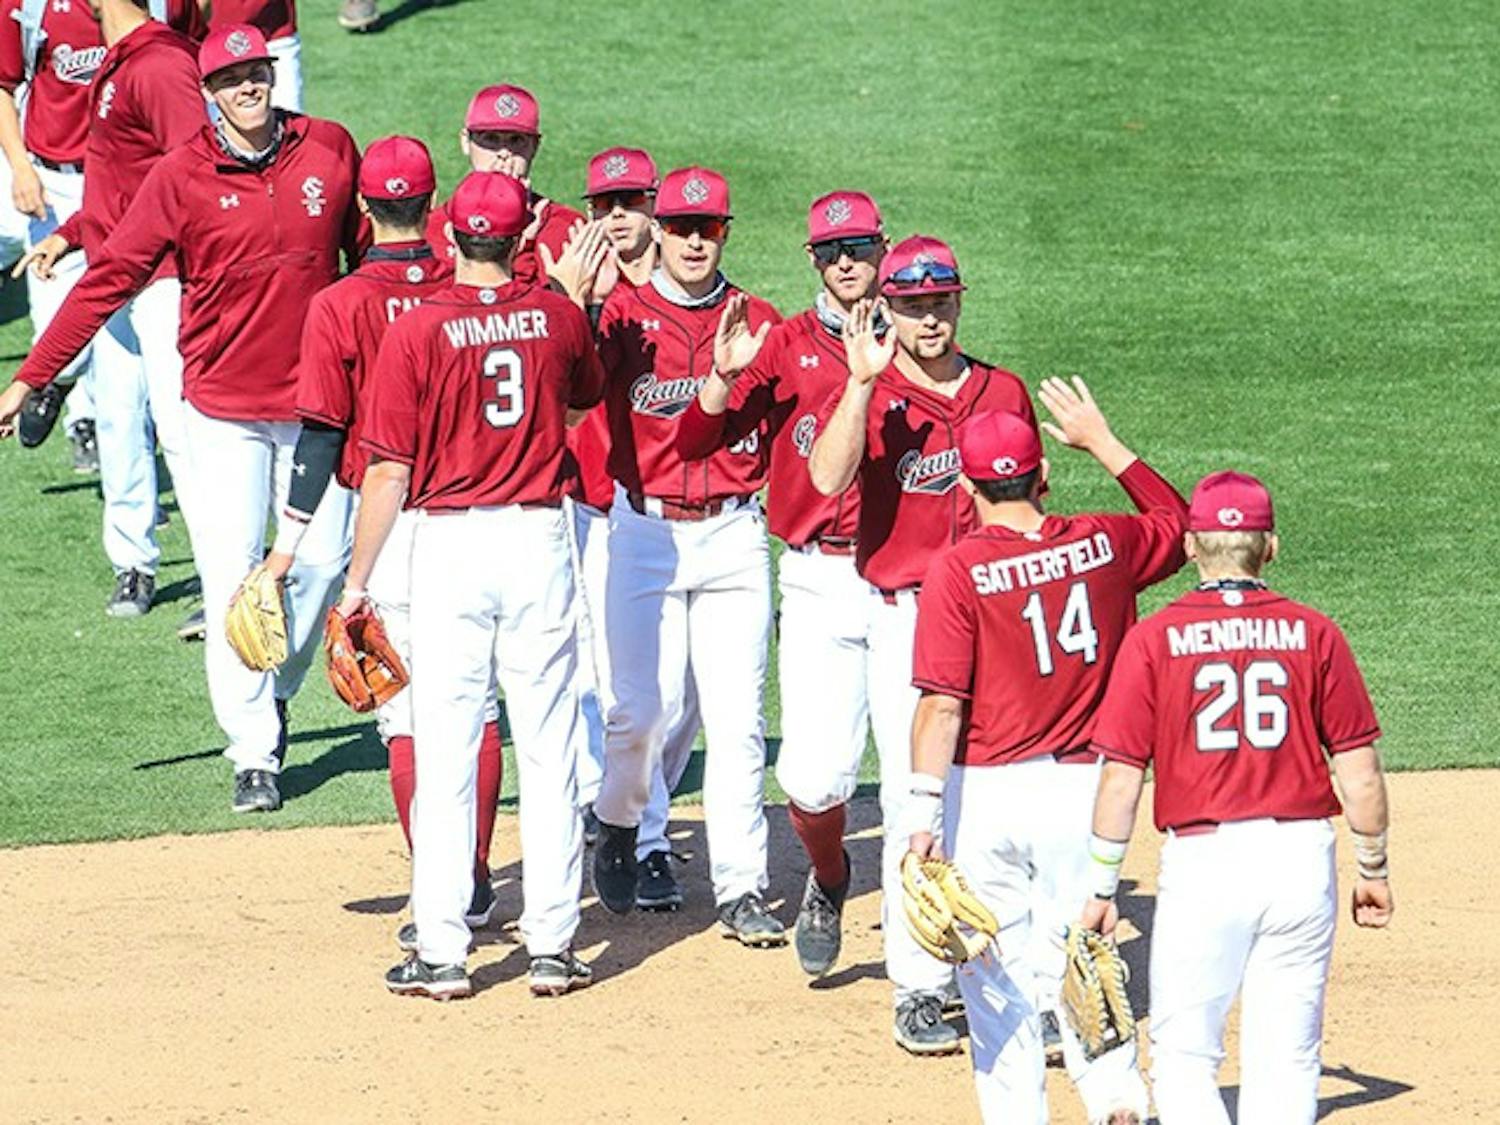 The South Carolina baseball team exchanges high fives after a game.